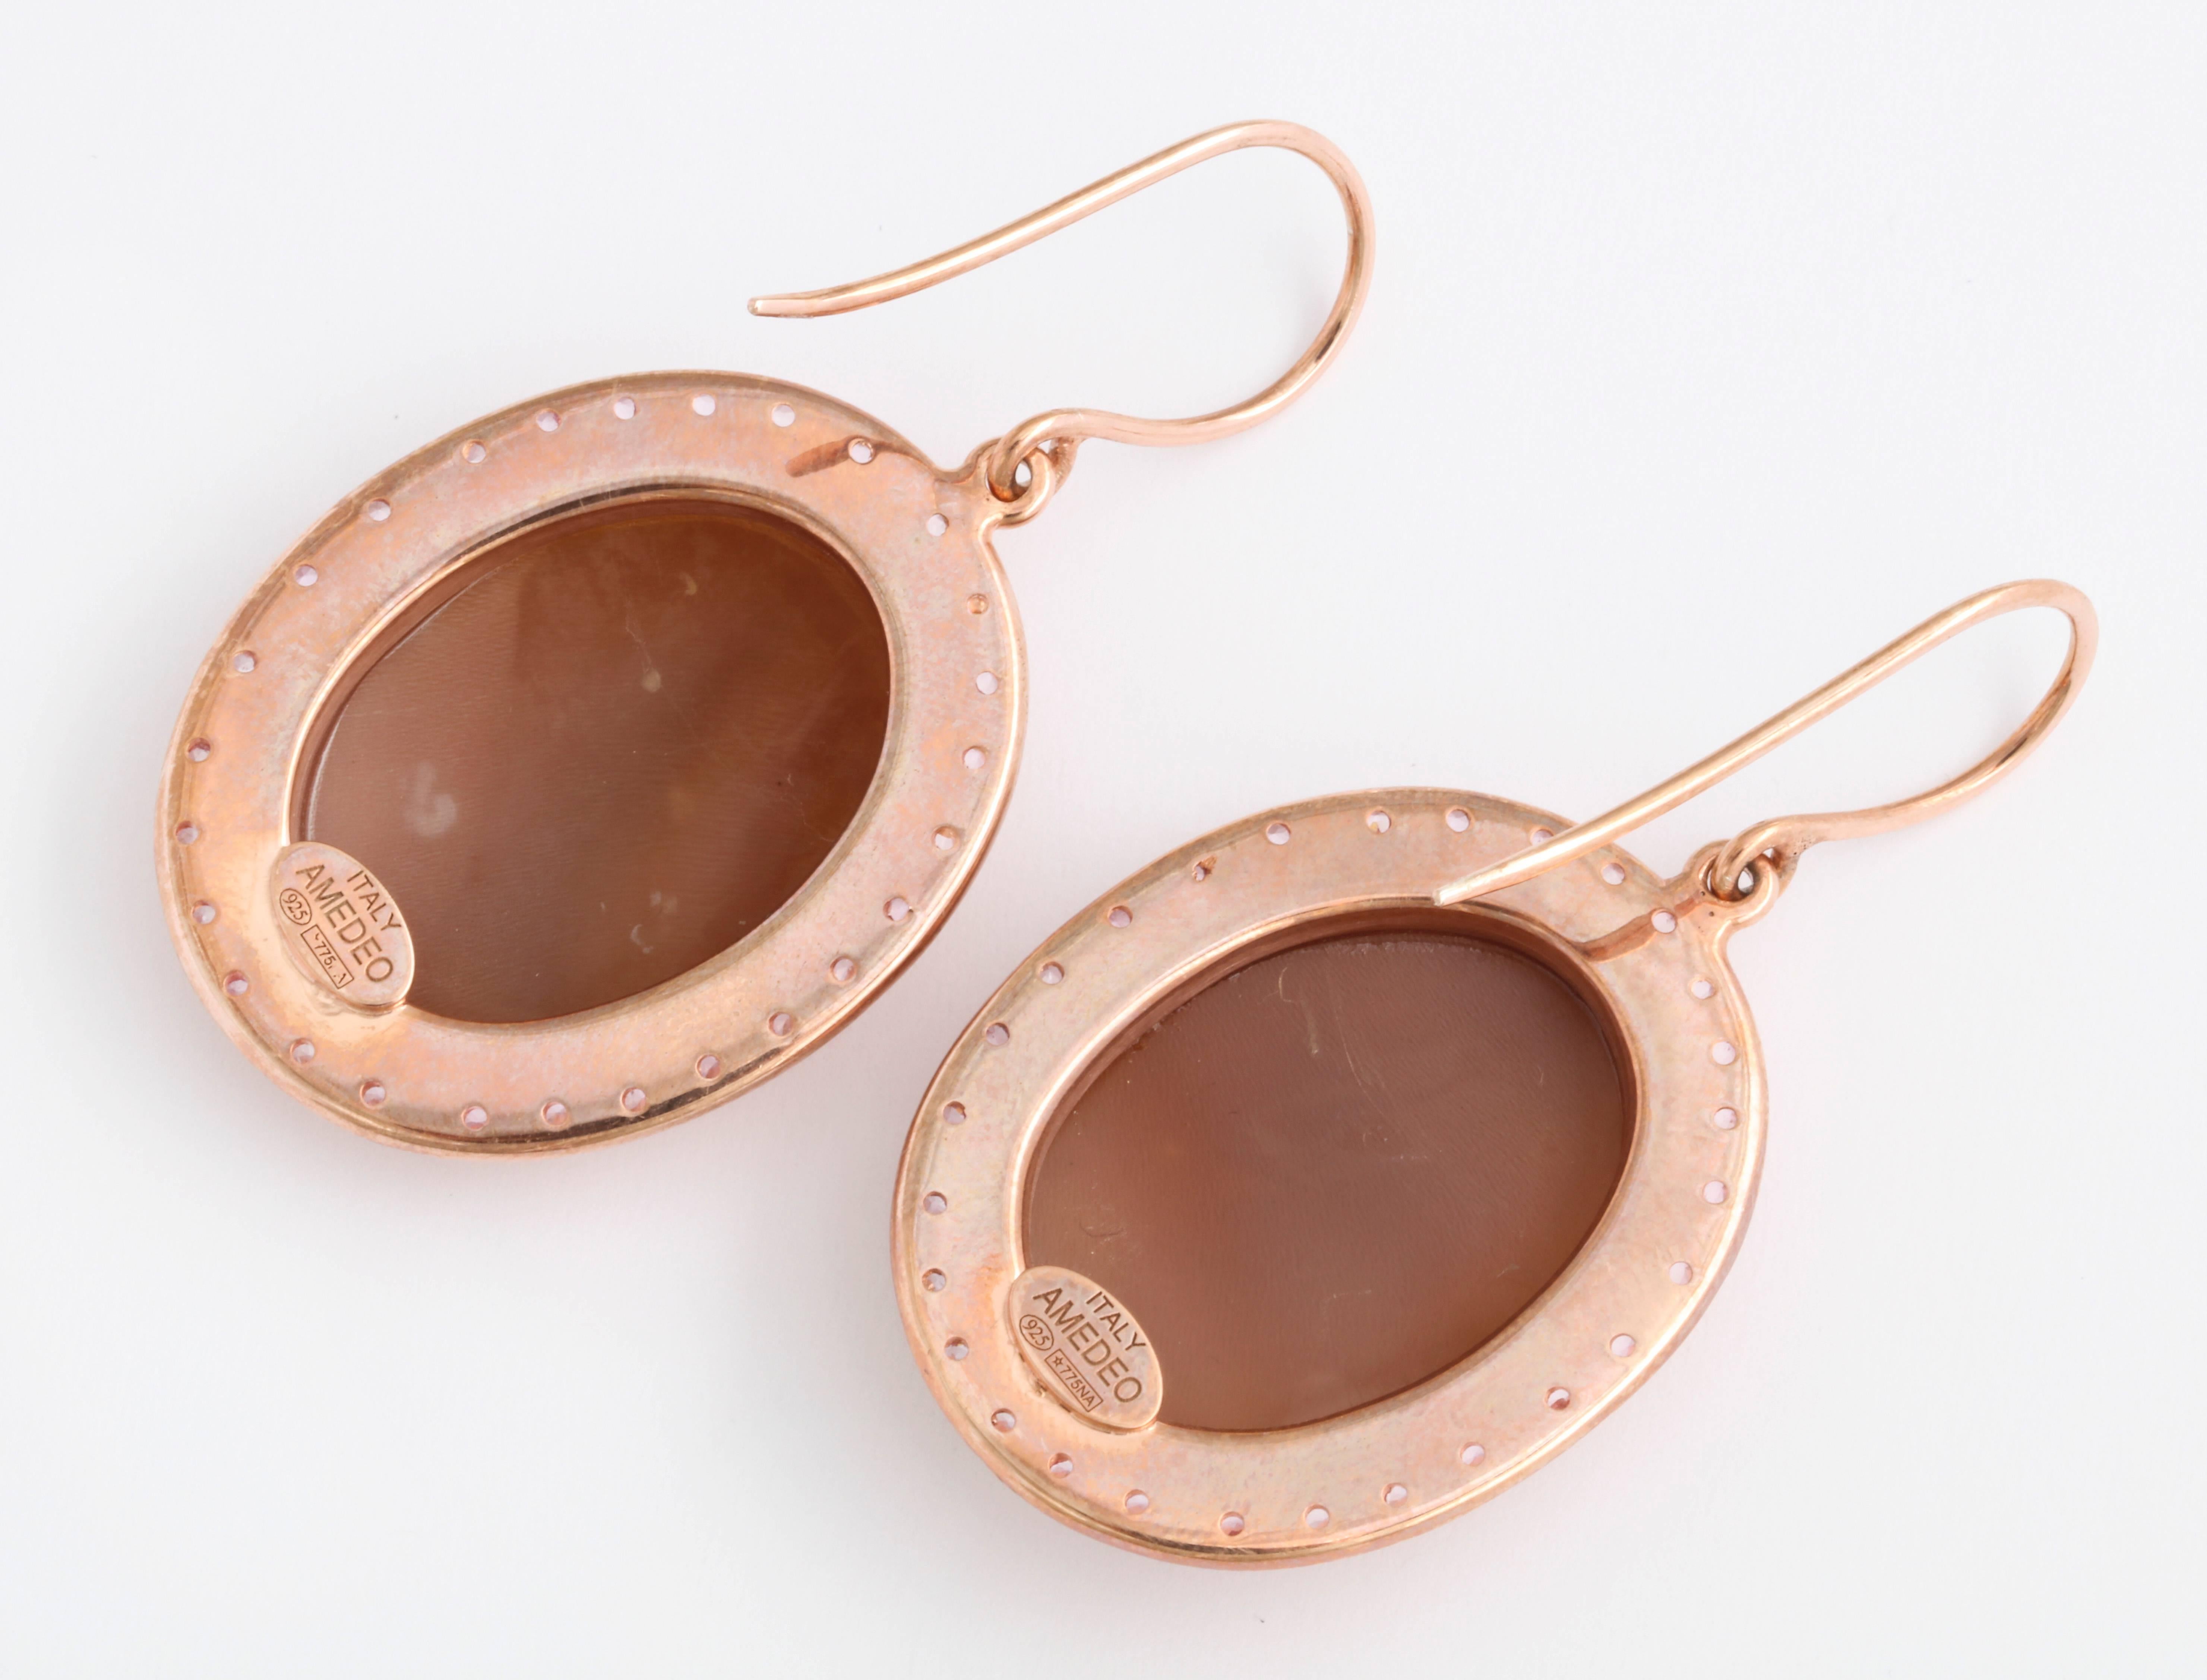 25mm sardonyx shell cameos hand-carved set in sterling silver rose rhodium plated earrings with rose sapphires.